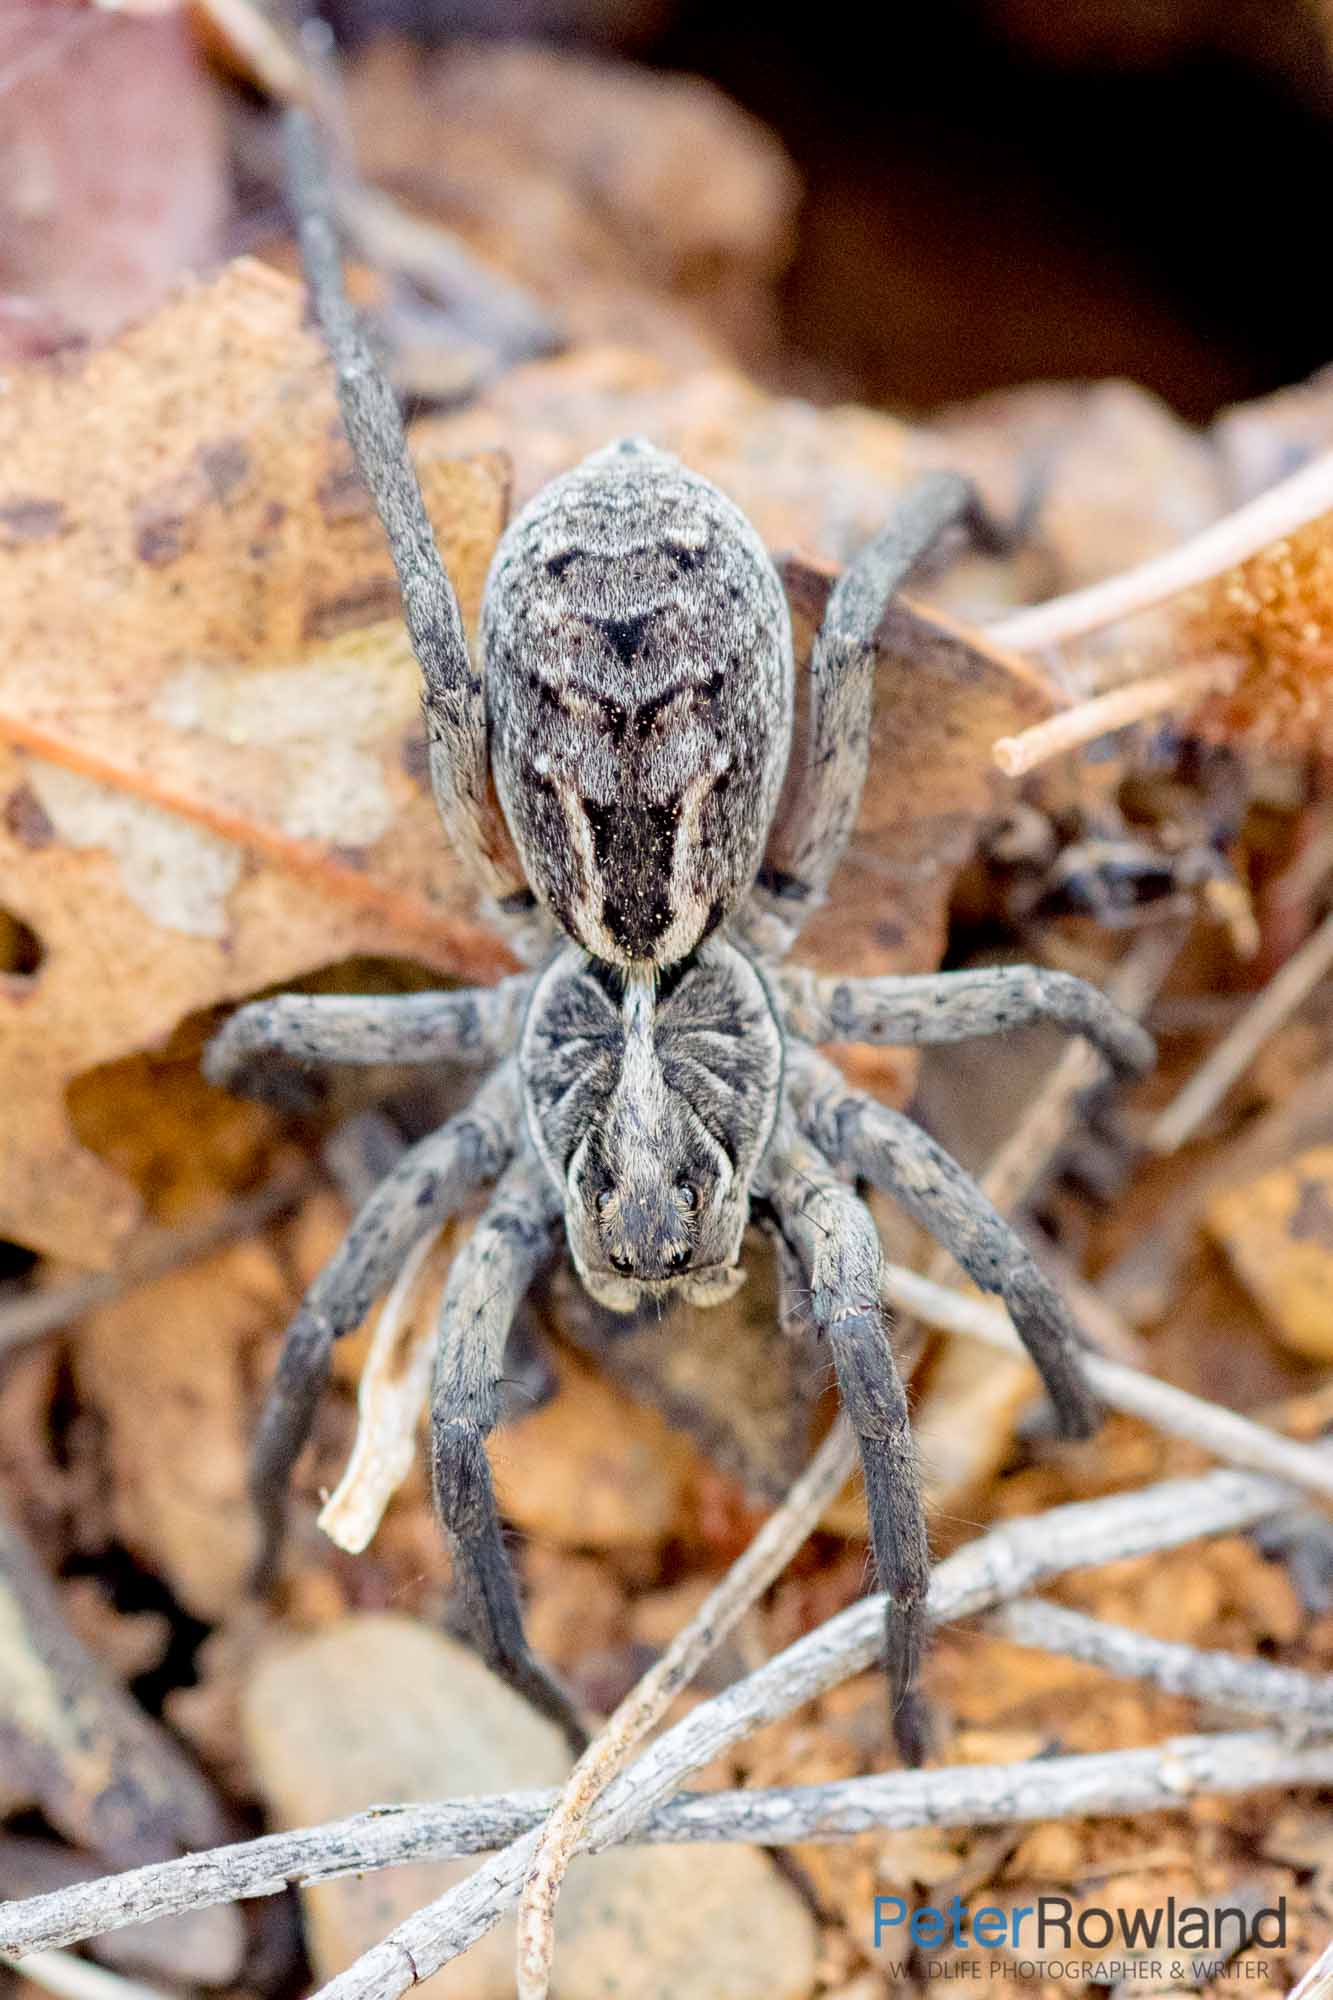 A Garden Wolf Spider crawling out if its burrow on the leaf covered ground